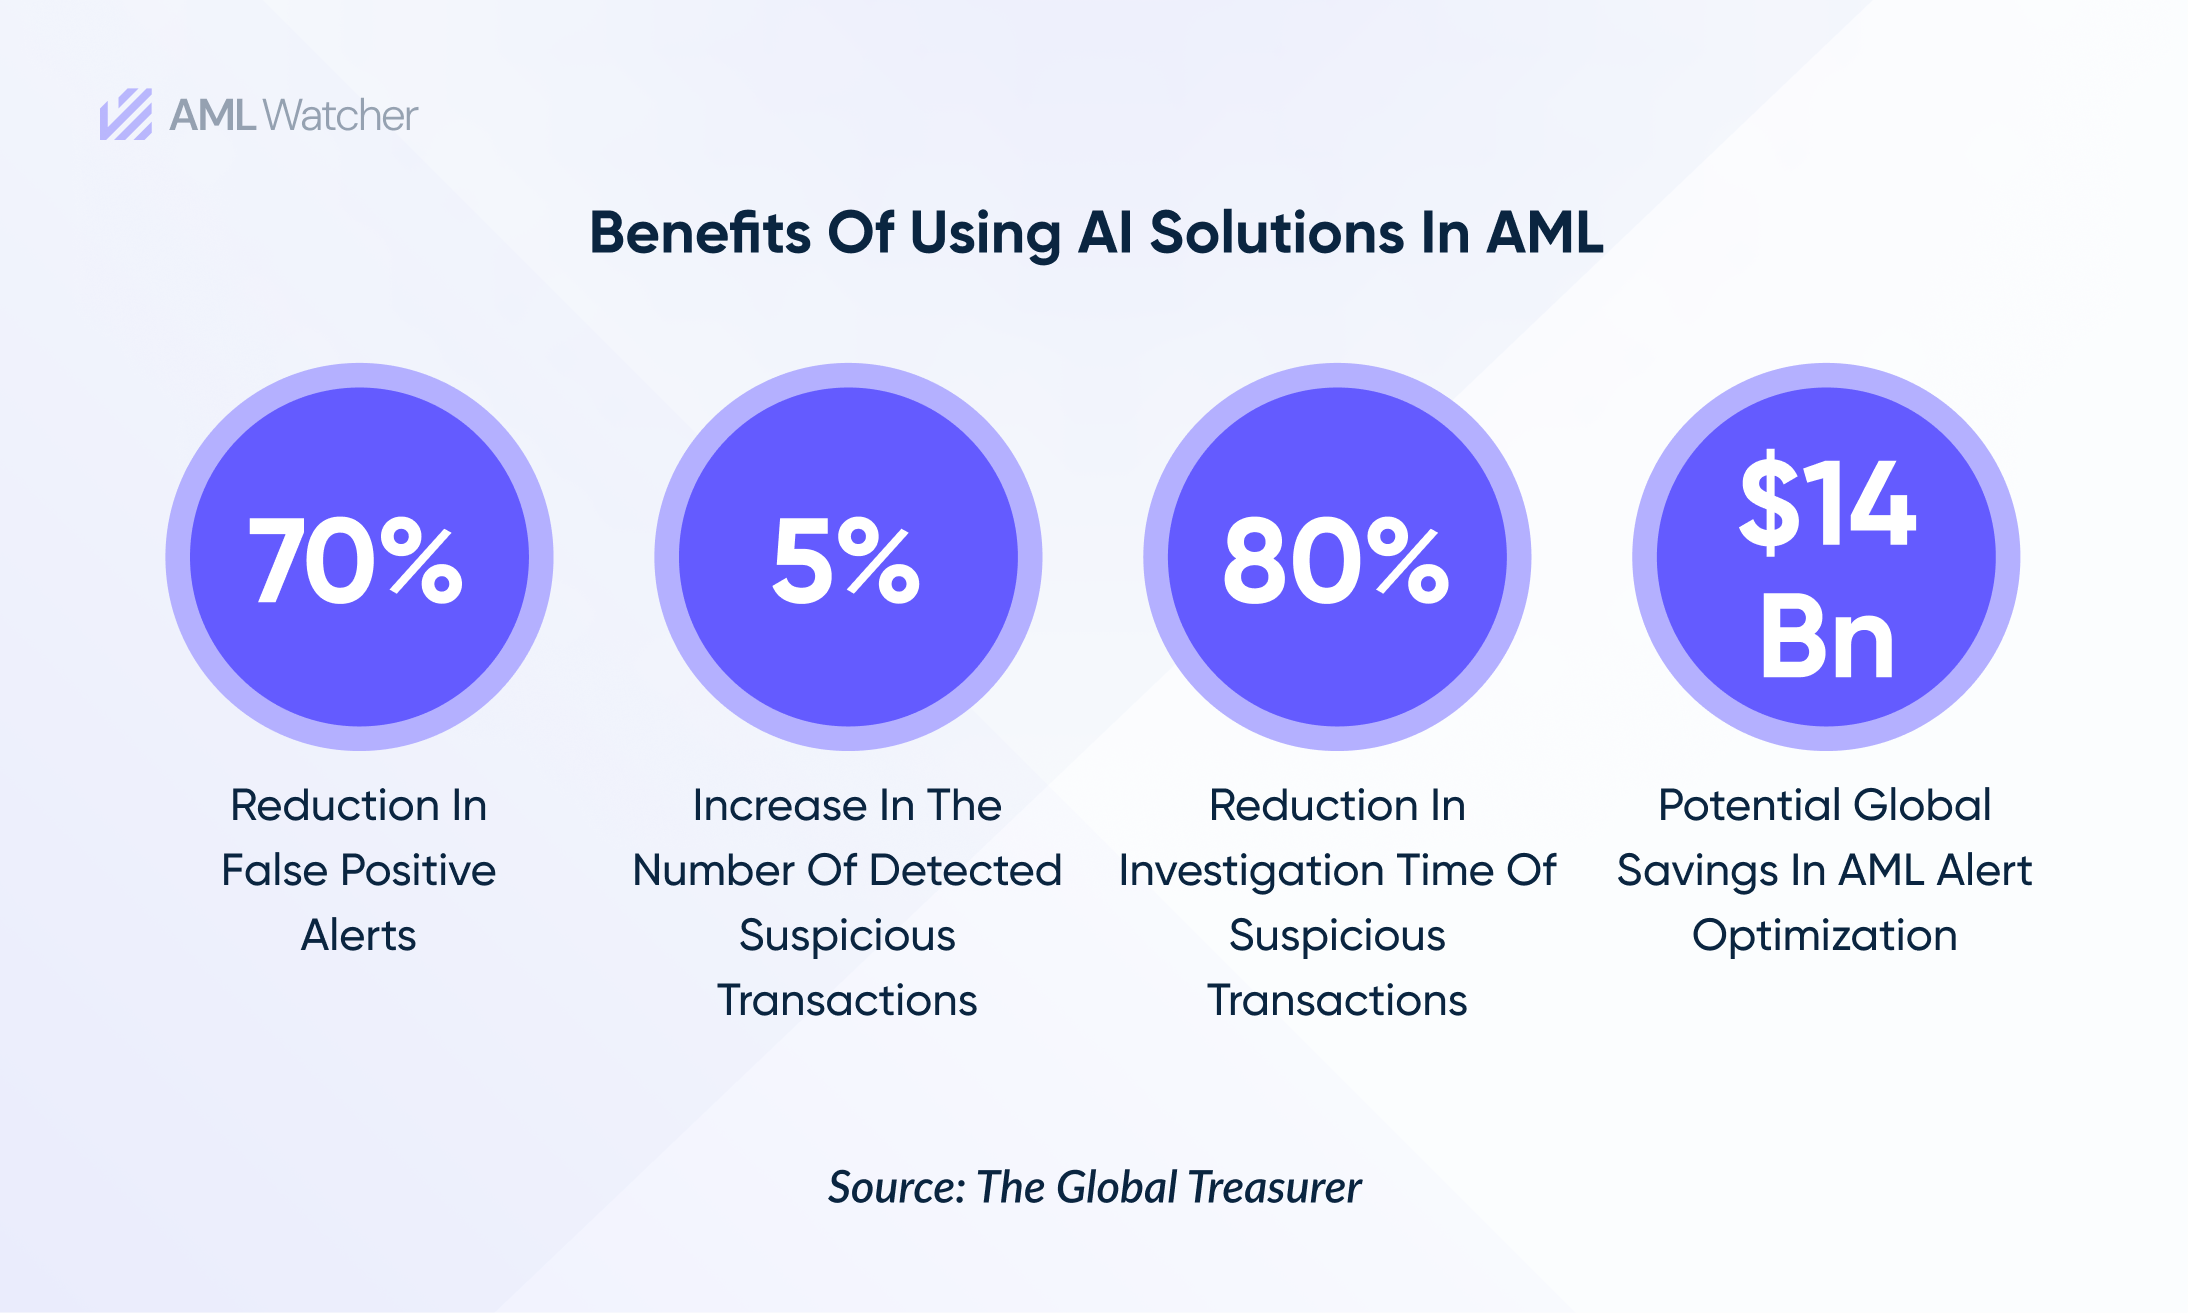 This image shows the crucial advantages of using AI solutions in AML.